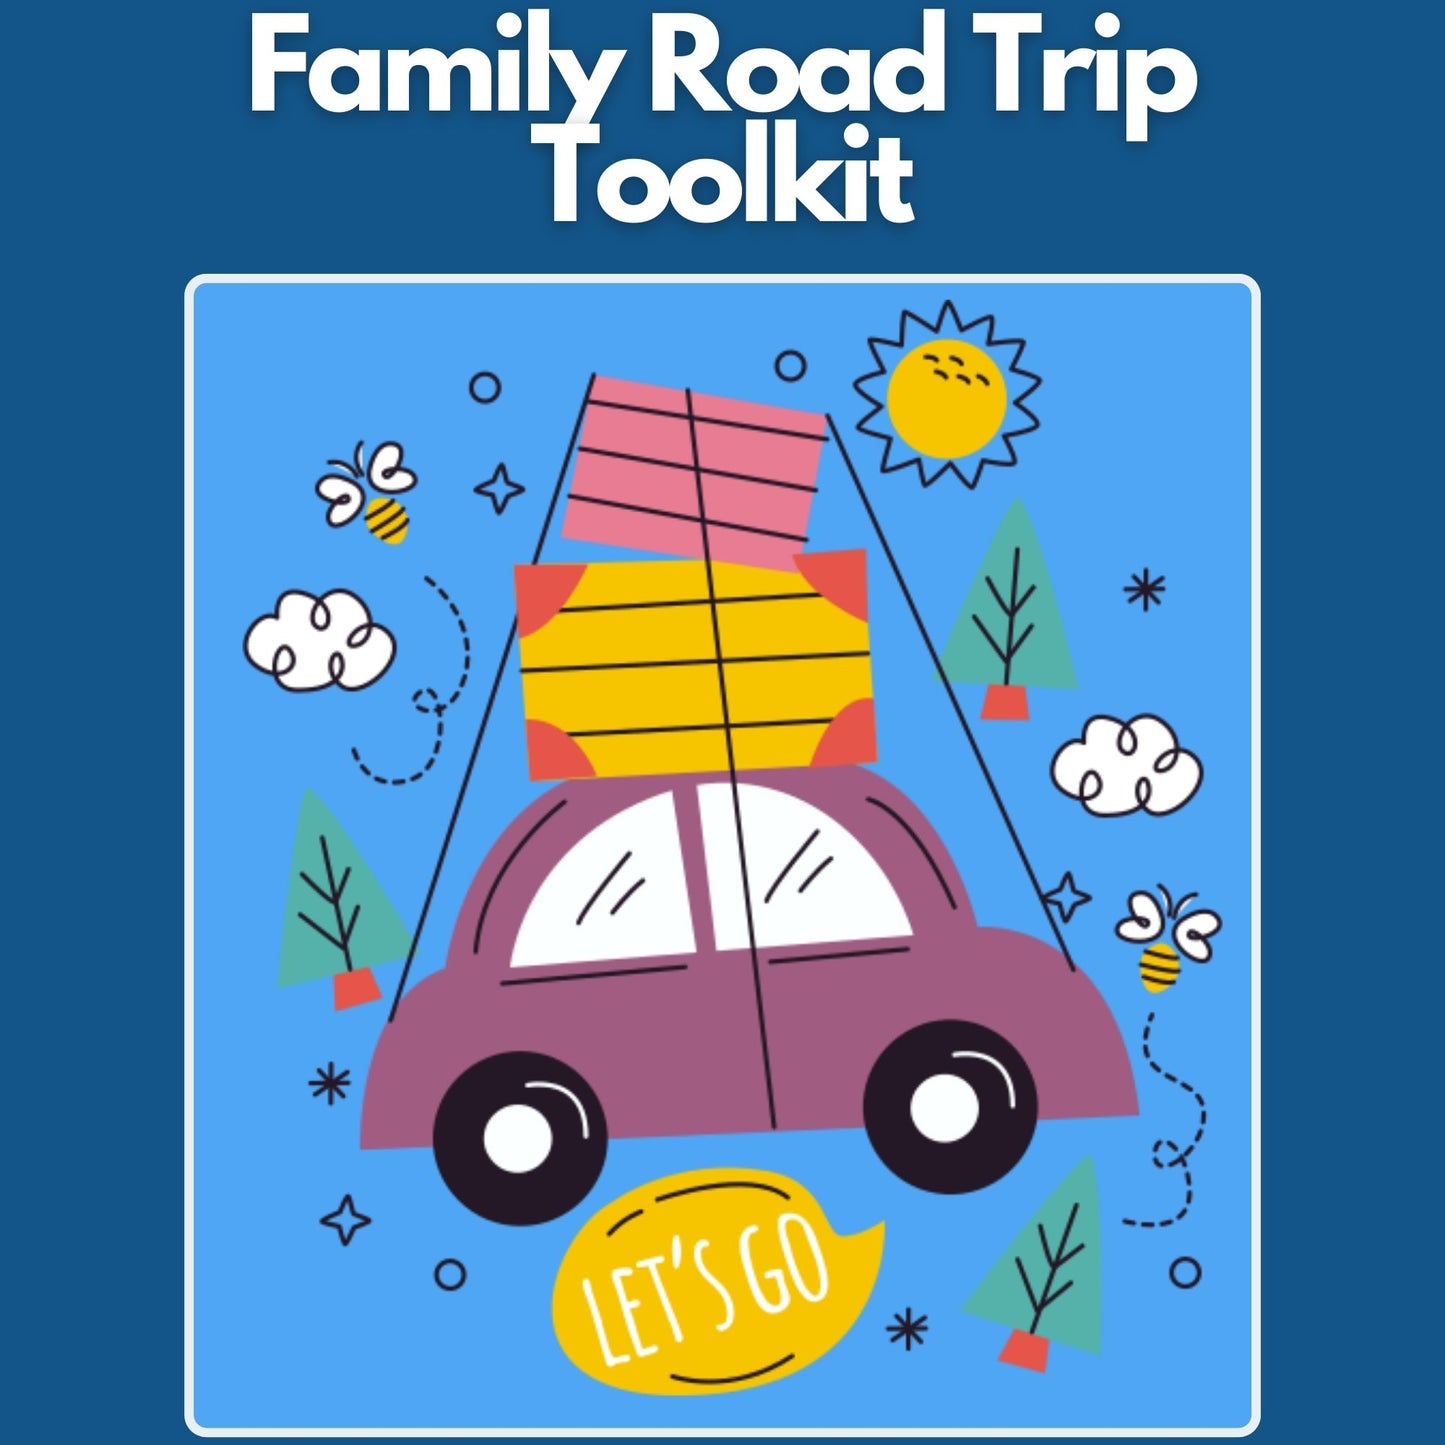 Family Road Trip Toolkit - FREE Download for Families (download only)